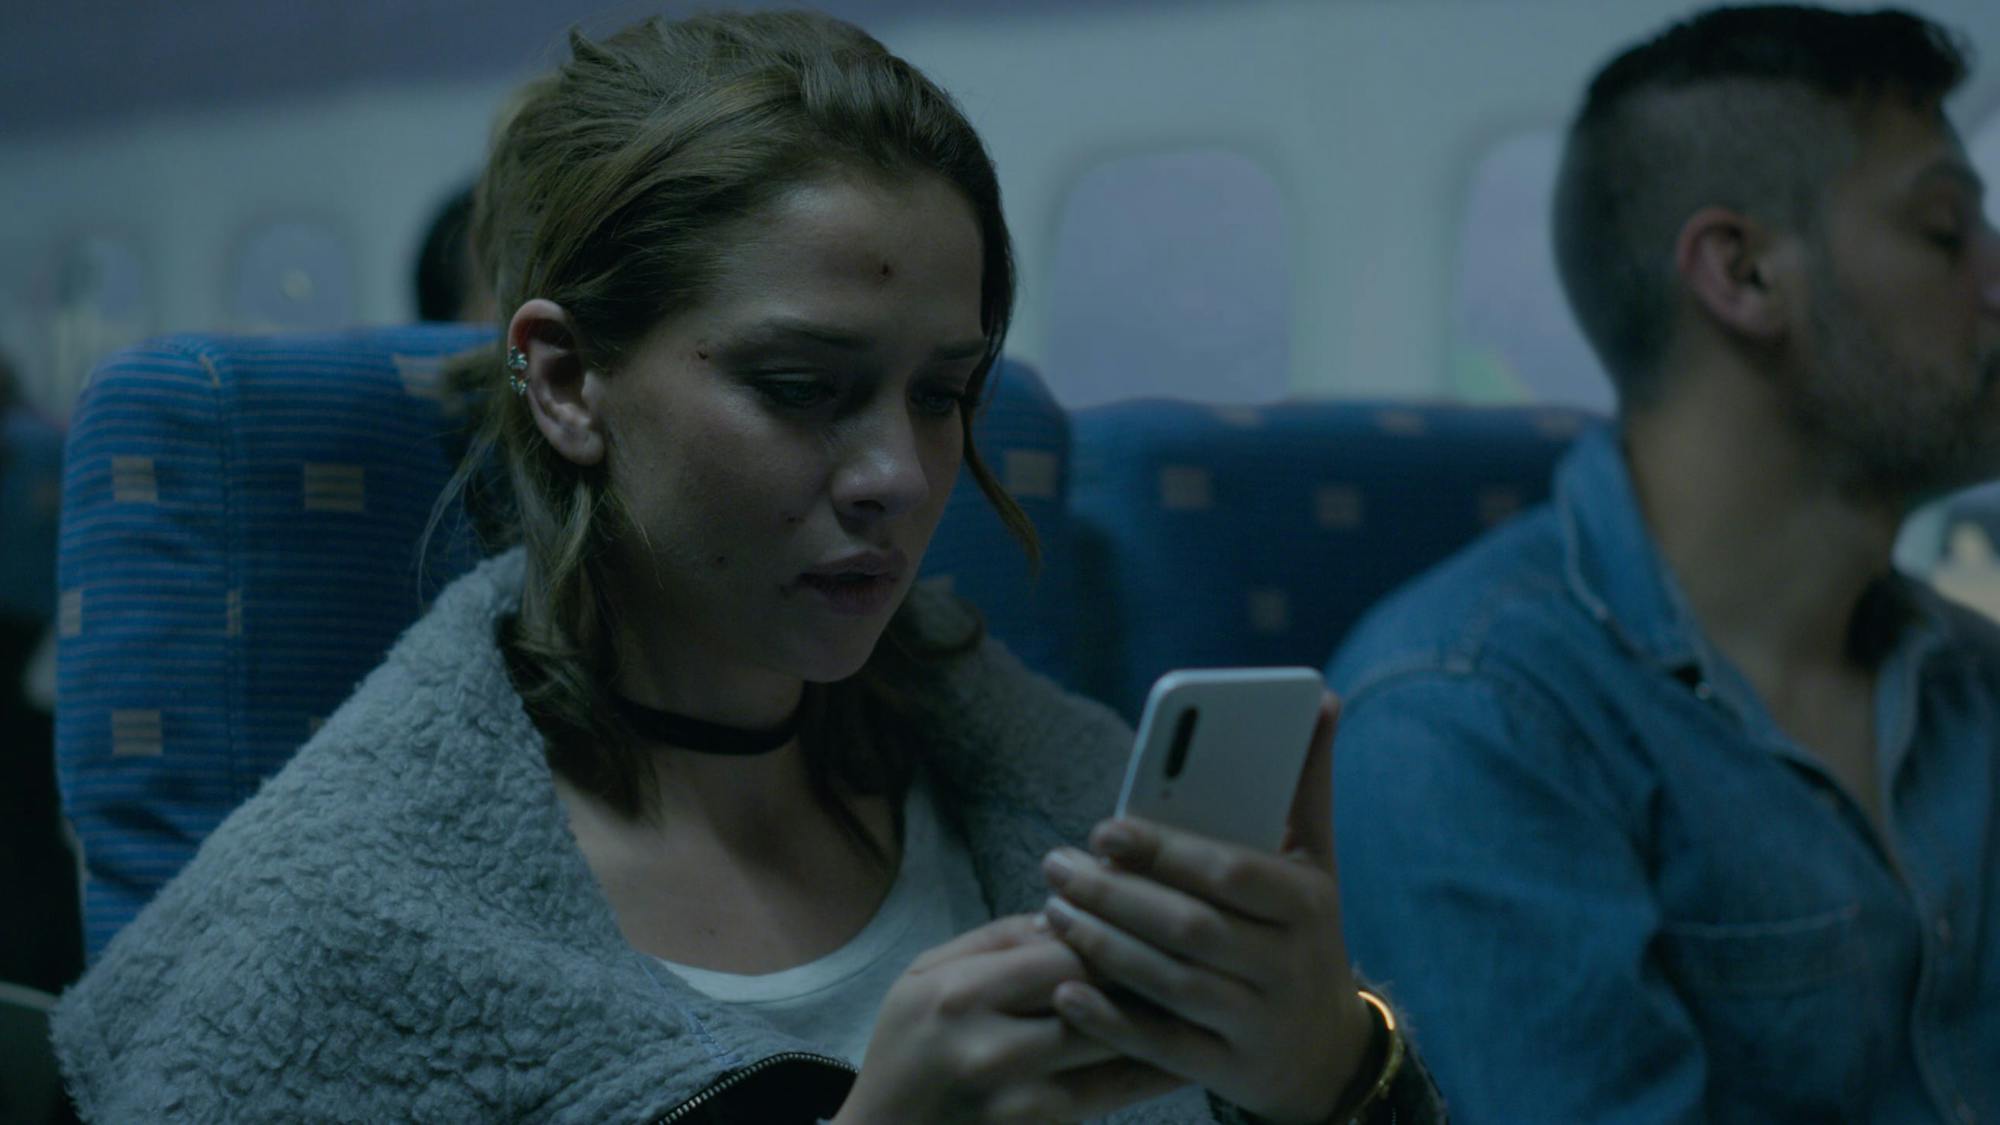 Dressed in a grey furry shawl and a black choker, Elisa (Carolina Miranda) looks at her white phone. Her face is slightly bloodied, although that doesn’t seem to concern the other passengers on the plane.